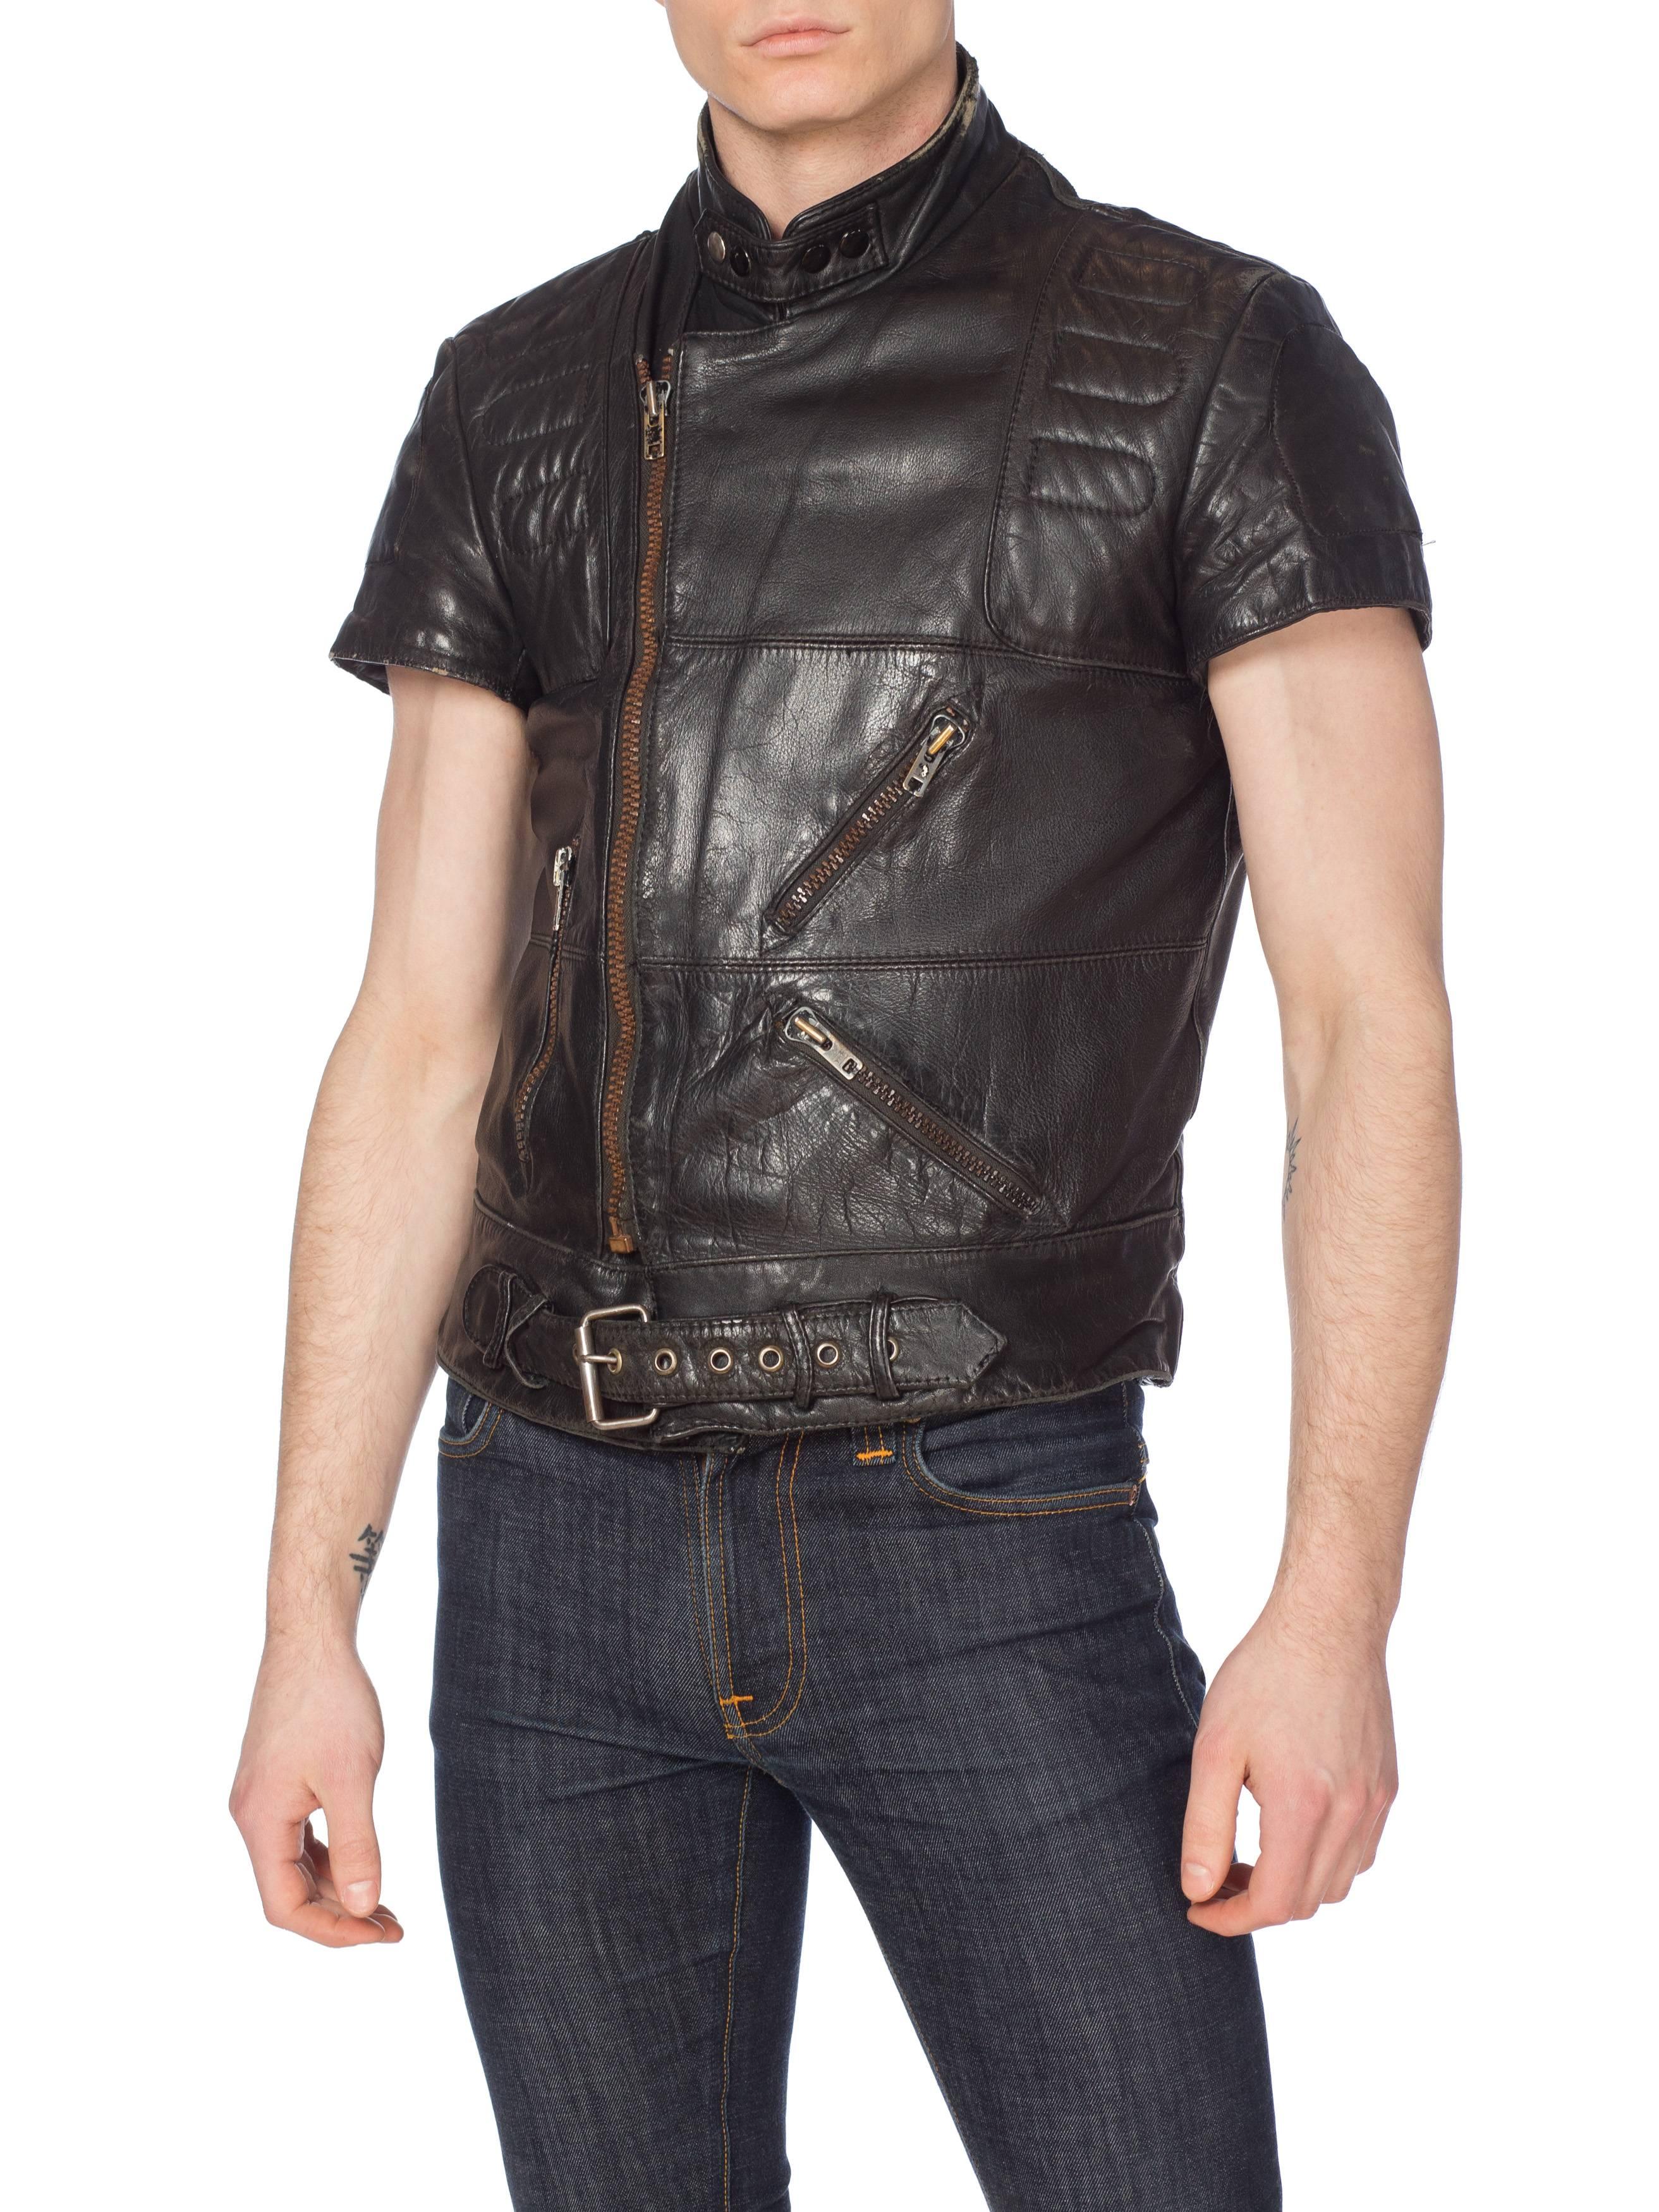 Mens Cropped Sleeve Leather Biker Jacket Formerly Belonging to the Band Justice 12